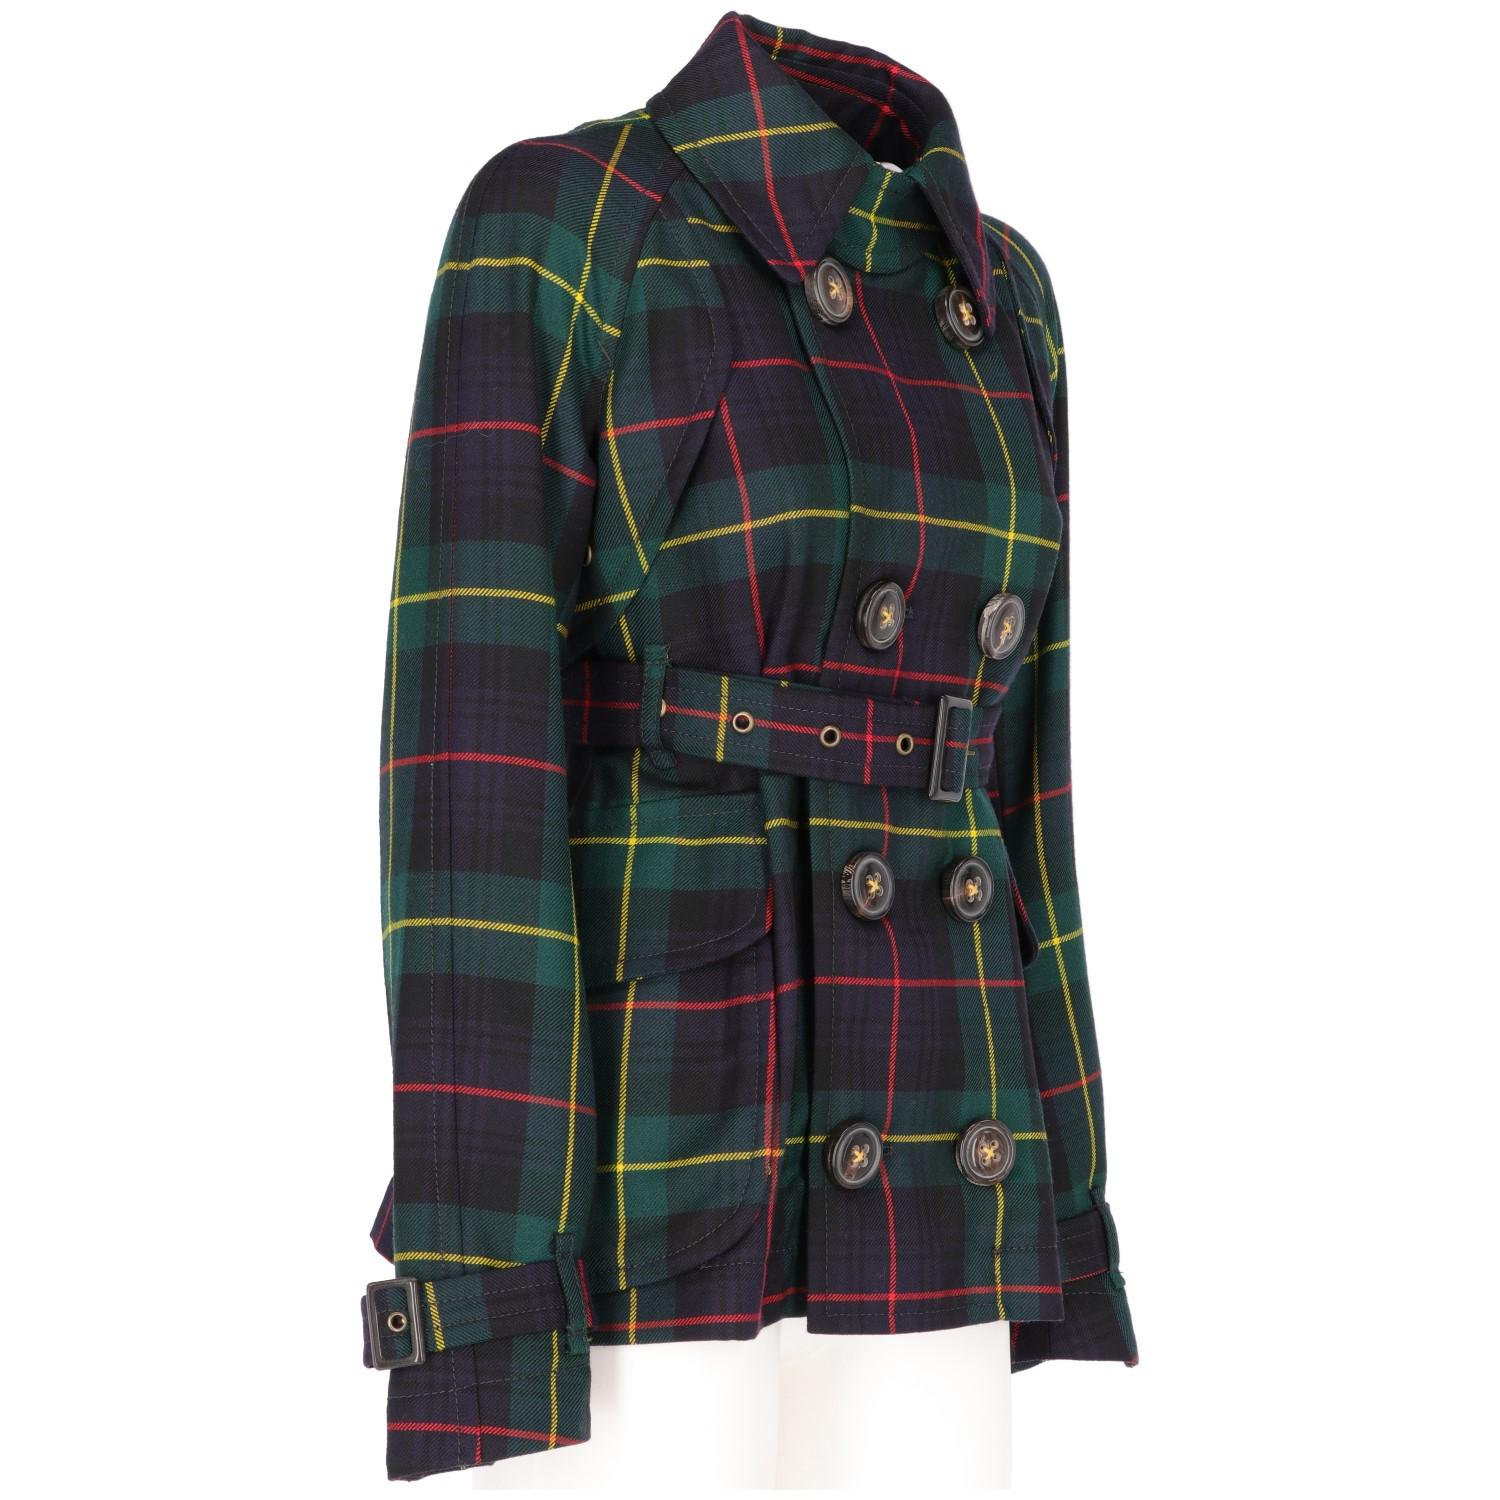 Dsquared2 tartan wool short trench coat in blue, green, yellow and red colors. Double-breasted front closure with thick buttons, waist belt with buckle, strap and buckle cuffs, classic collar with strap and button detail, two side pockets with flap,